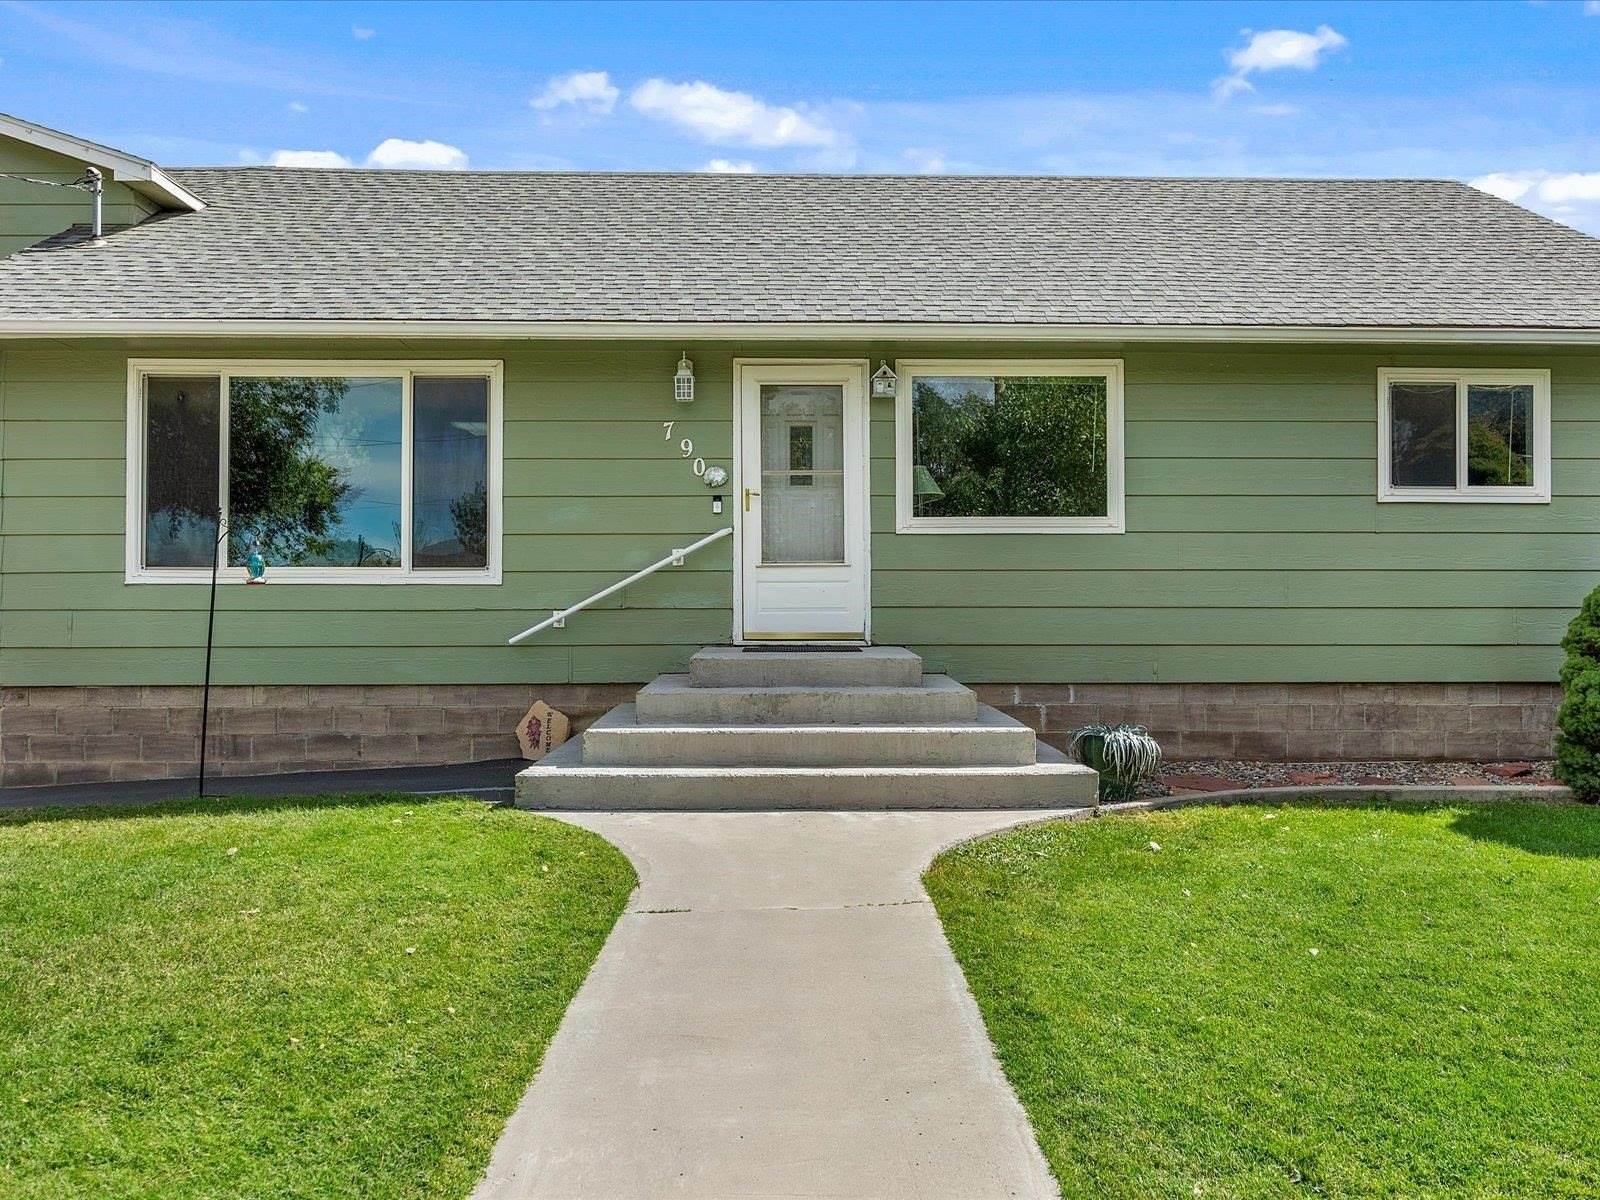 790 24 Road, Grand Junction, CO 81505